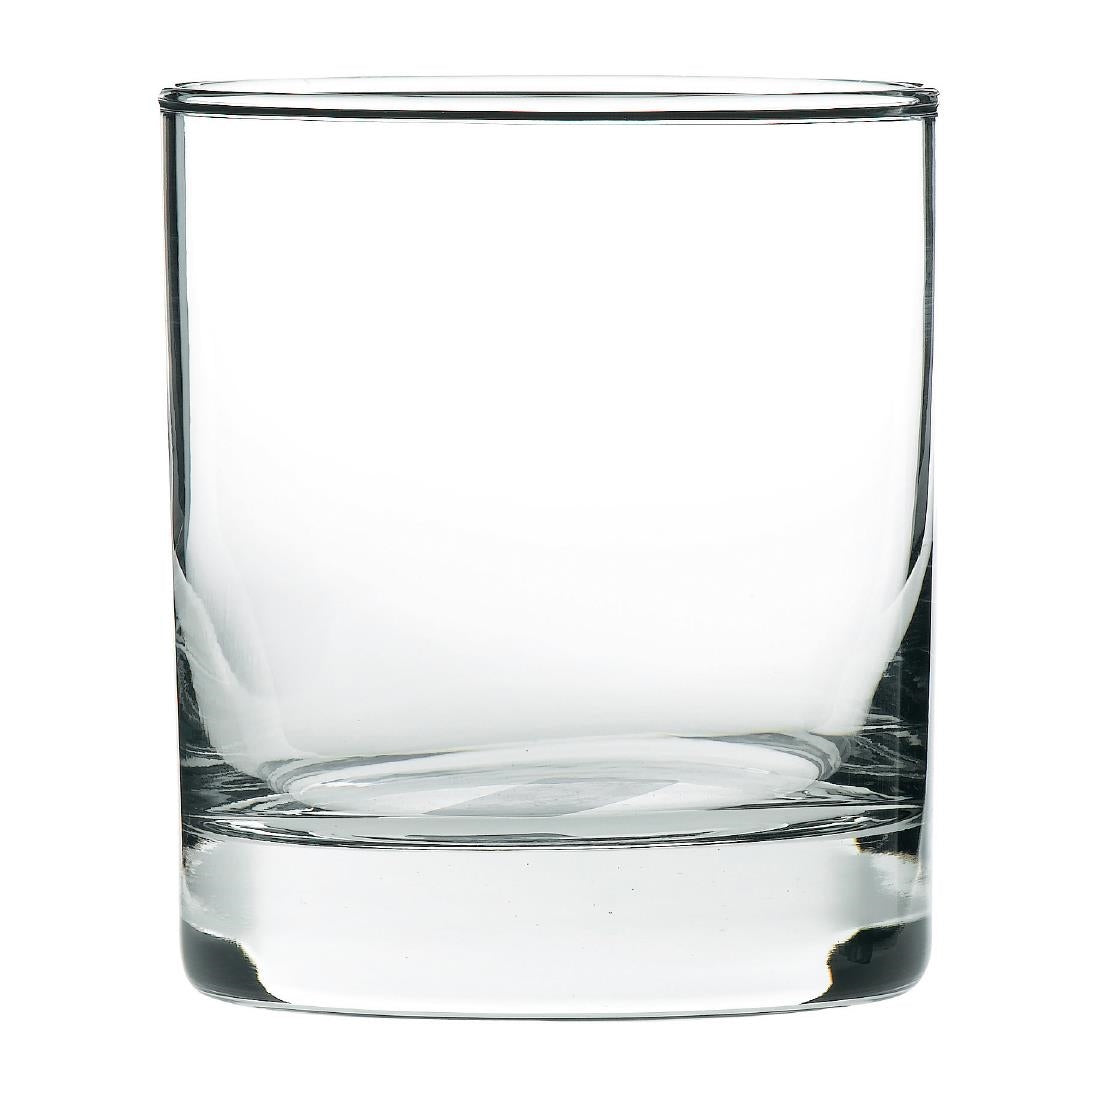 FU402 Onis Chicago Old Fashioned Glasses 300ml (Pack of 12)